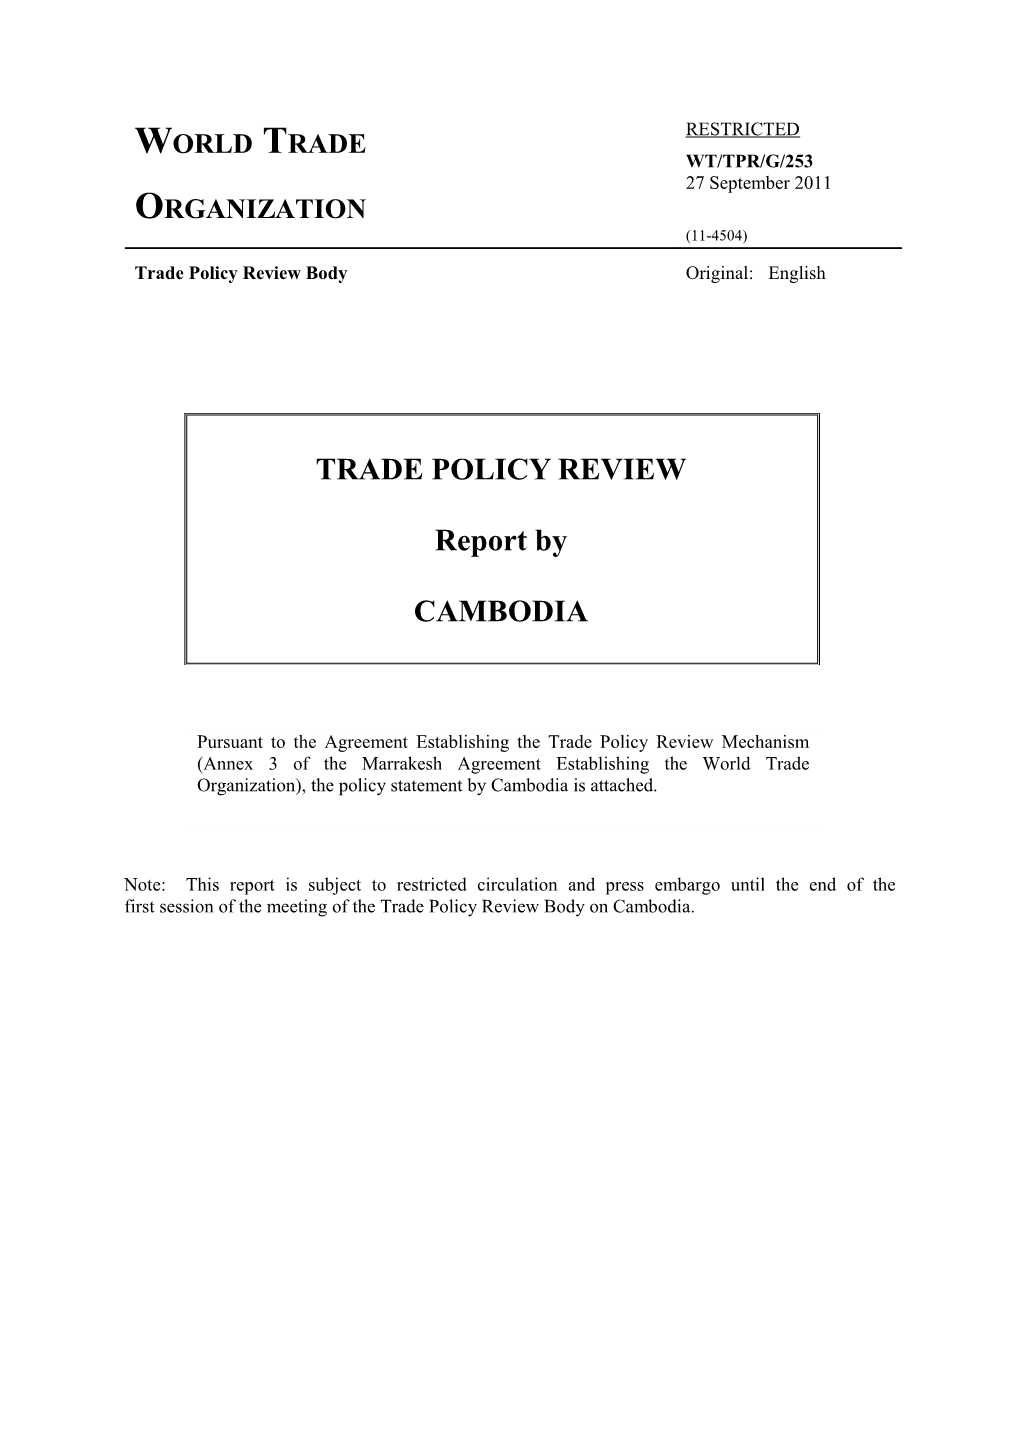 Trade Policy Review Body s2